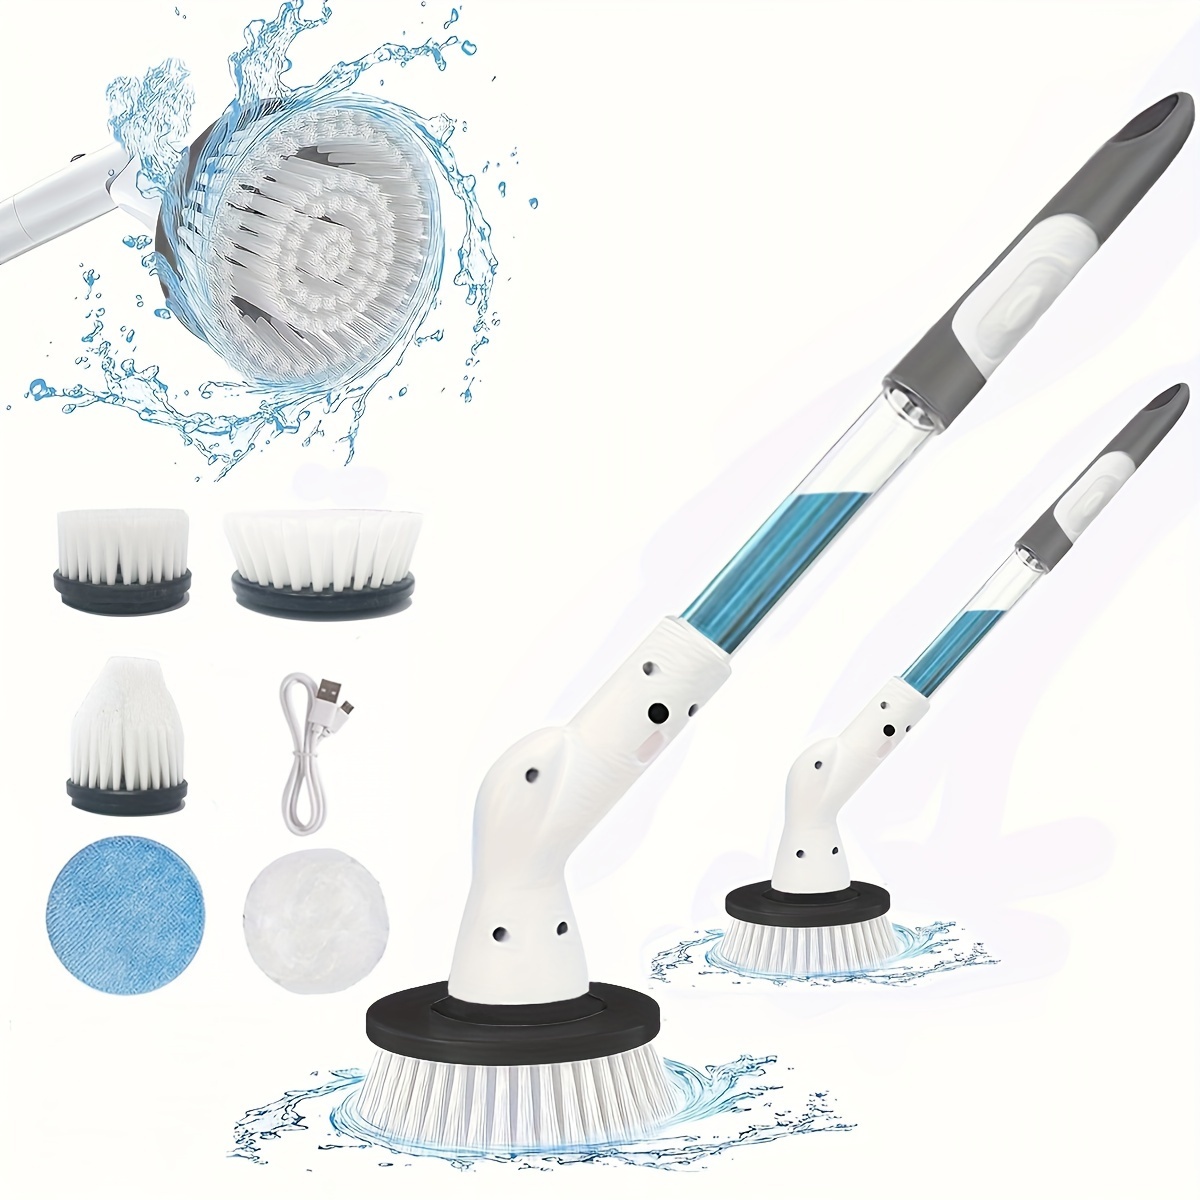 4 In 1 Cleaning Brush Shower Scrub Brush With Water Spray Design Portable Cleaning  Brush For Glass,wall,floor, Tub, Tile